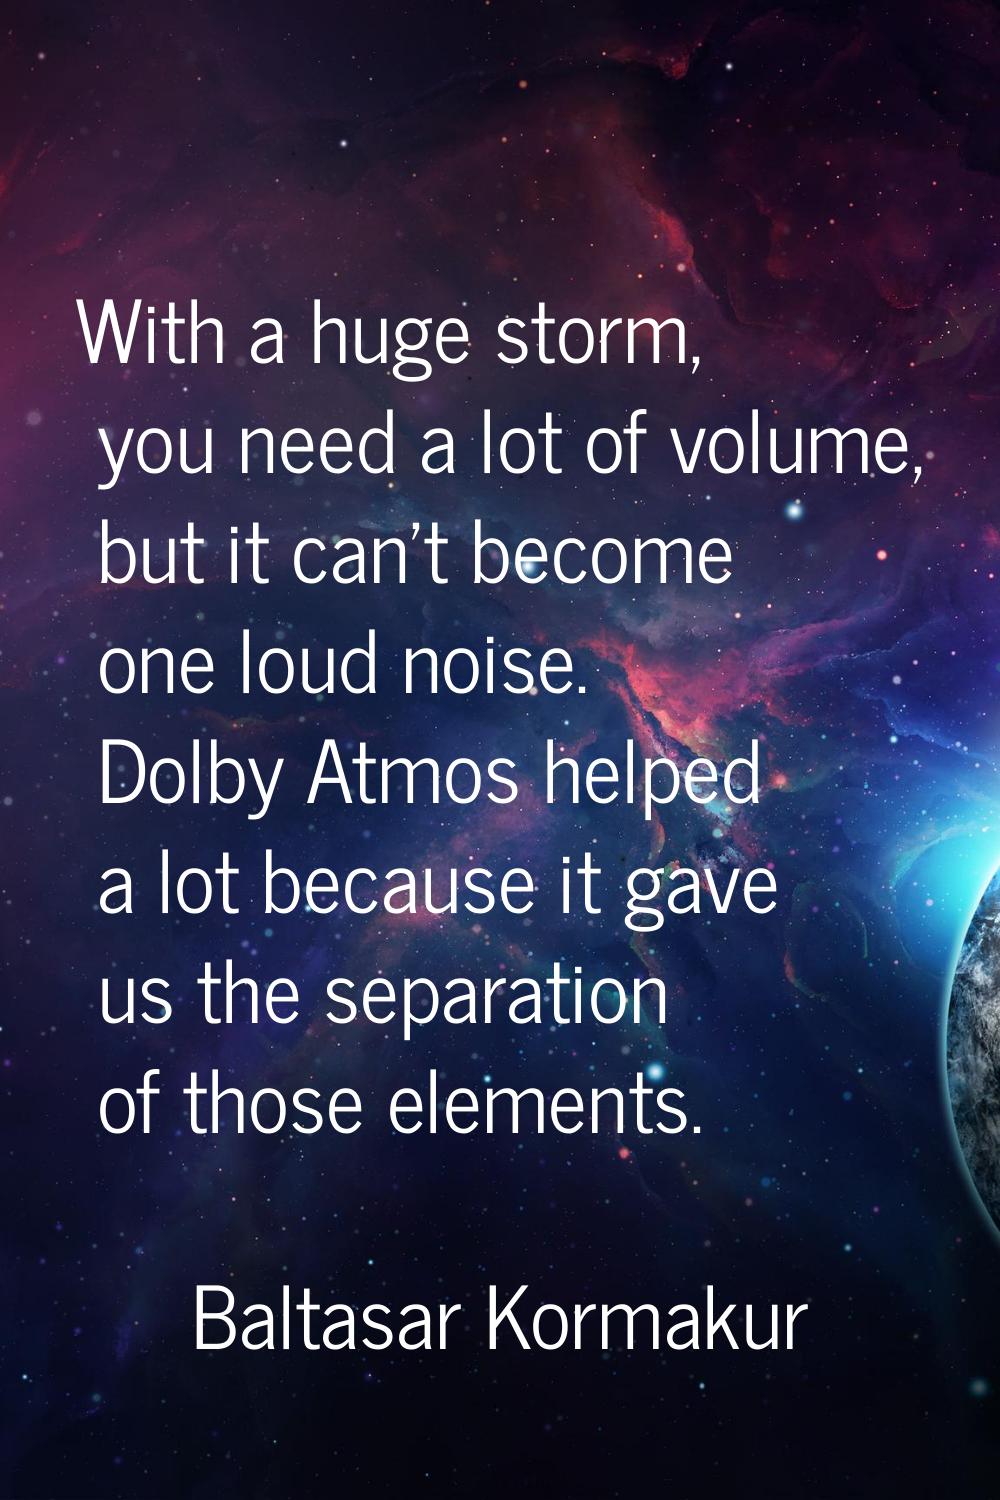 With a huge storm, you need a lot of volume, but it can't become one loud noise. Dolby Atmos helped